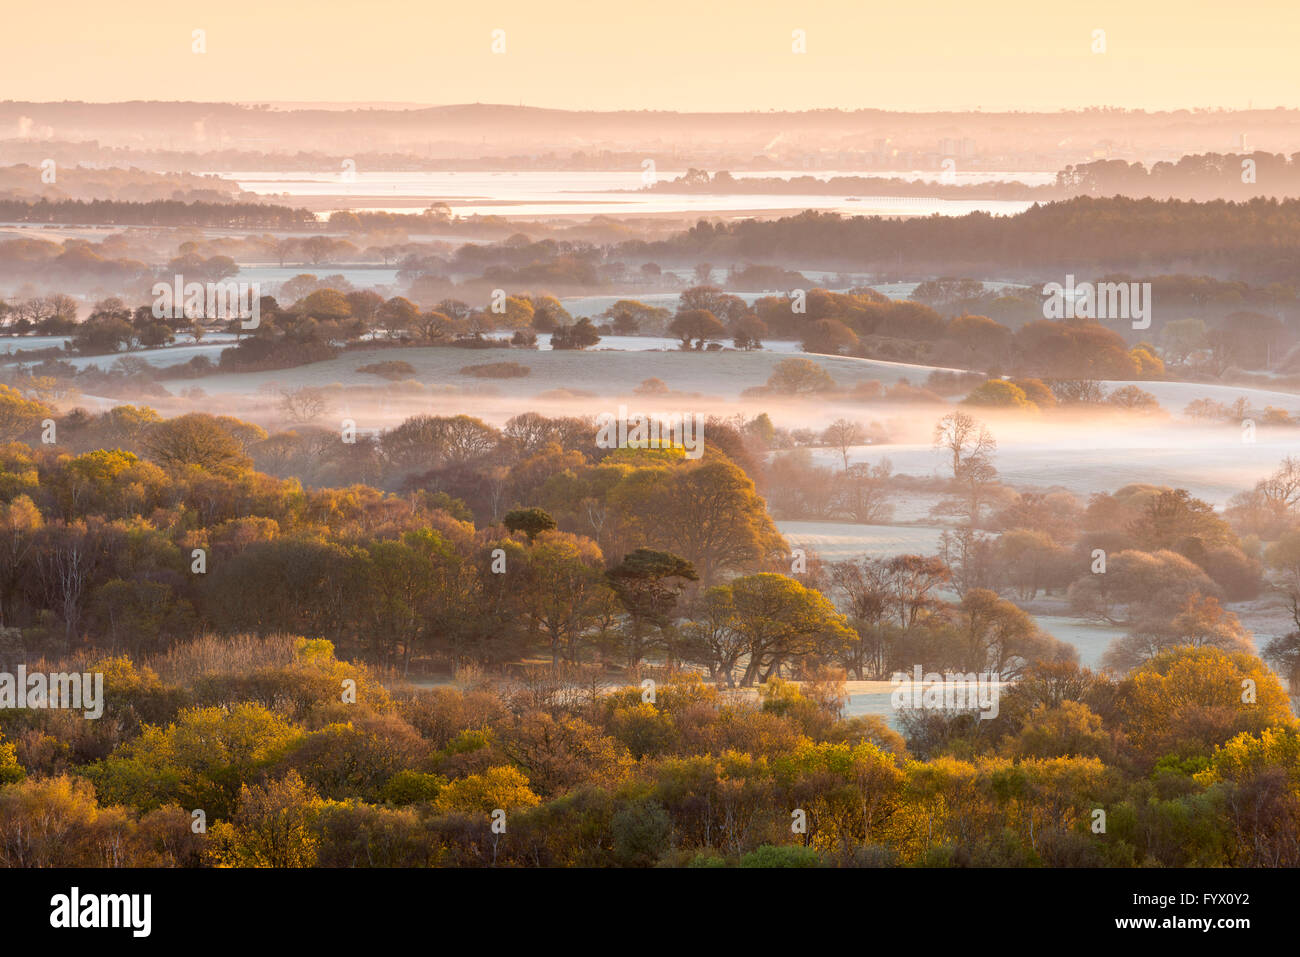 Stoborough Heath, Dorset, UK - 28th April 2016 - UK Weather - View from West Hill at Corfe Castle in Dorset across Stoborough Heath in Purbeck looking towards Poole - Picture: Graham Hunt/Alamy Live News Stock Photo